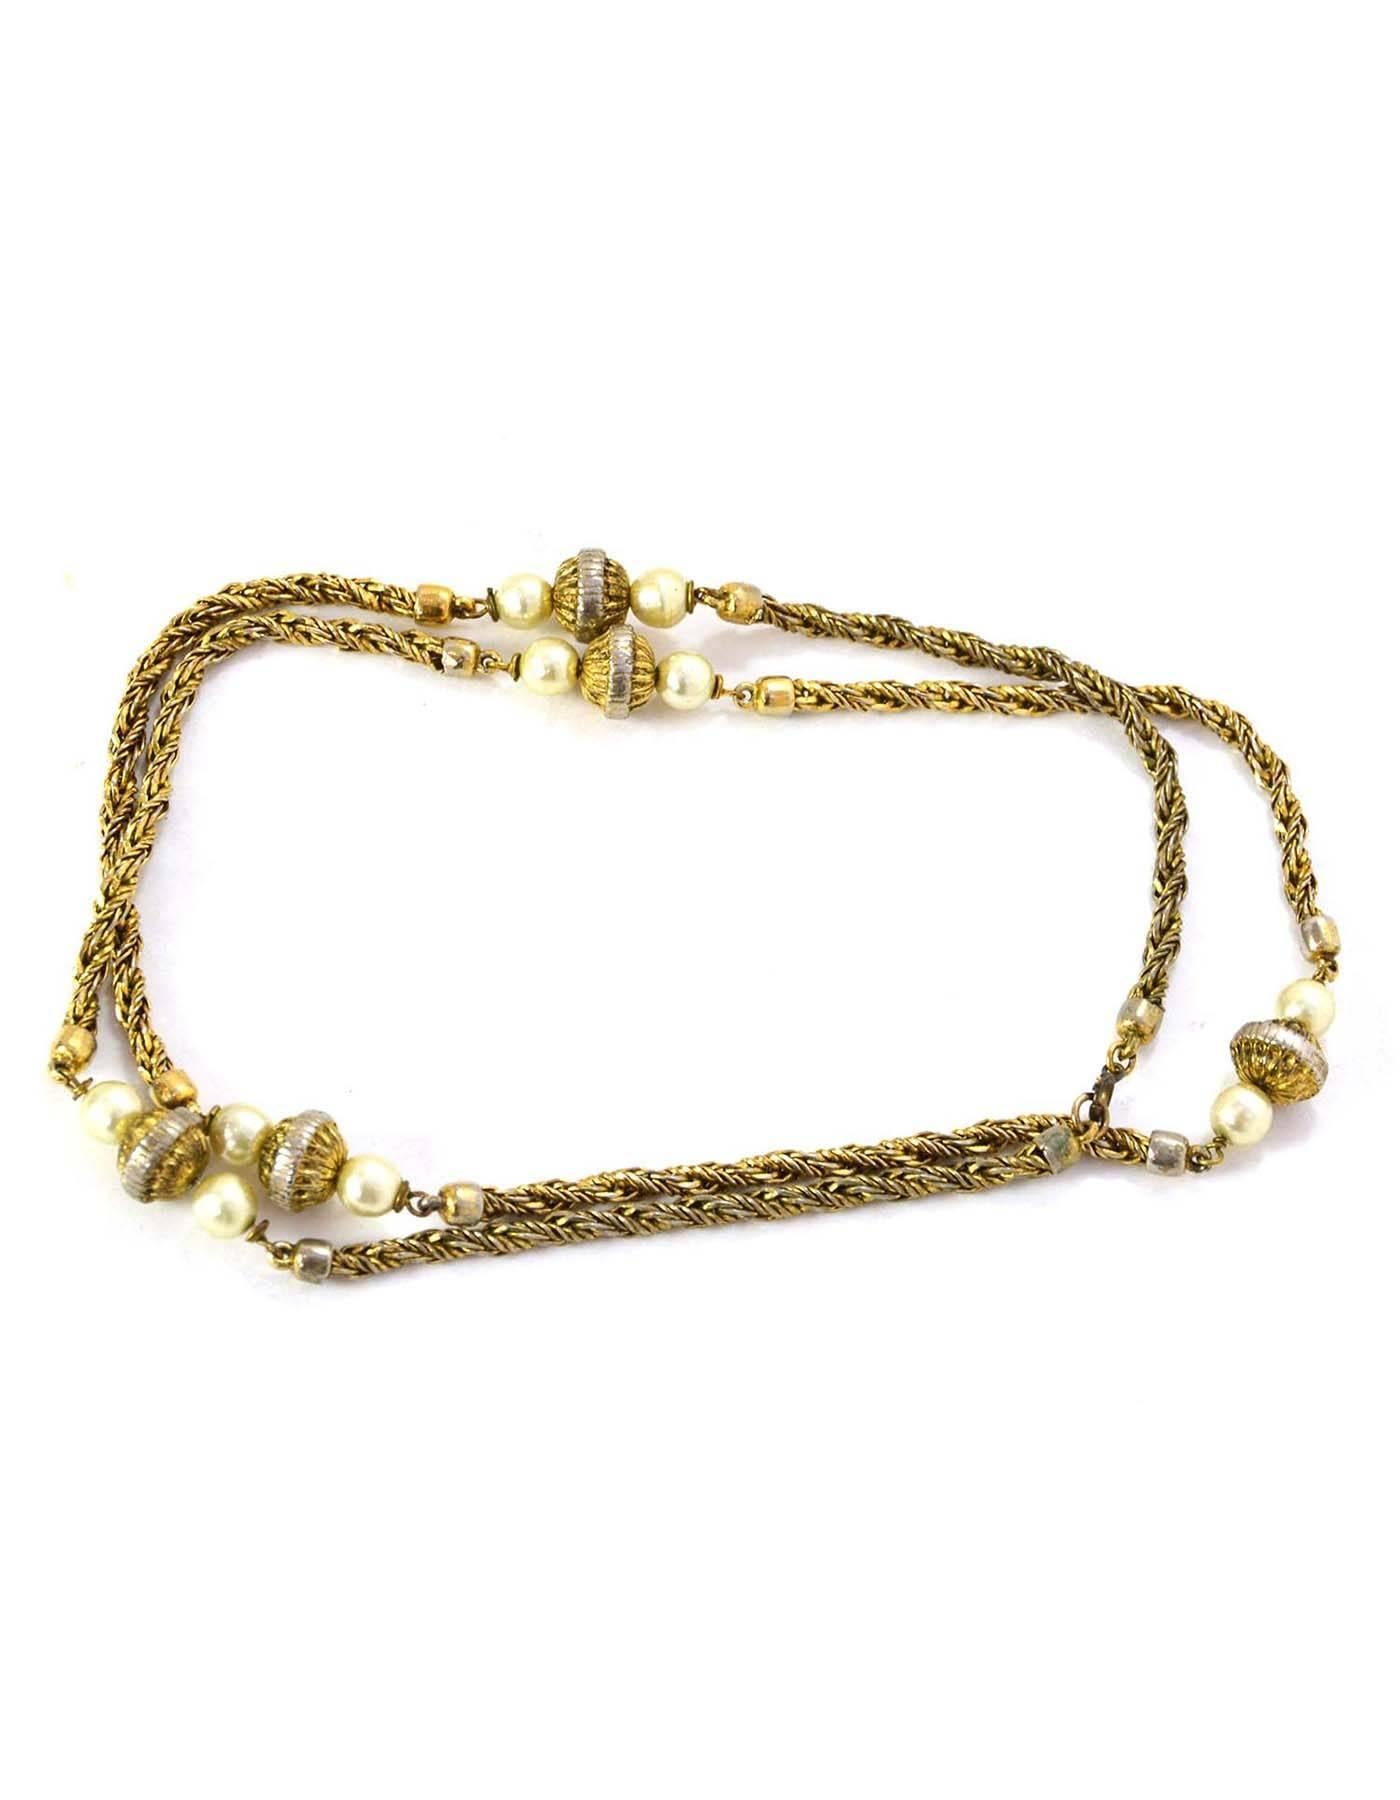 Chanel Pearl & Gold Beaded Long Chain Link Necklace 
Features faux pearls and goldtone beads

Made In: France
Year of Production: Circa 1950s-1960s
Color: Goldtone and Ivory
Materials: goldtone metal, faux pearls
Closure/Opening: 
Stamp: